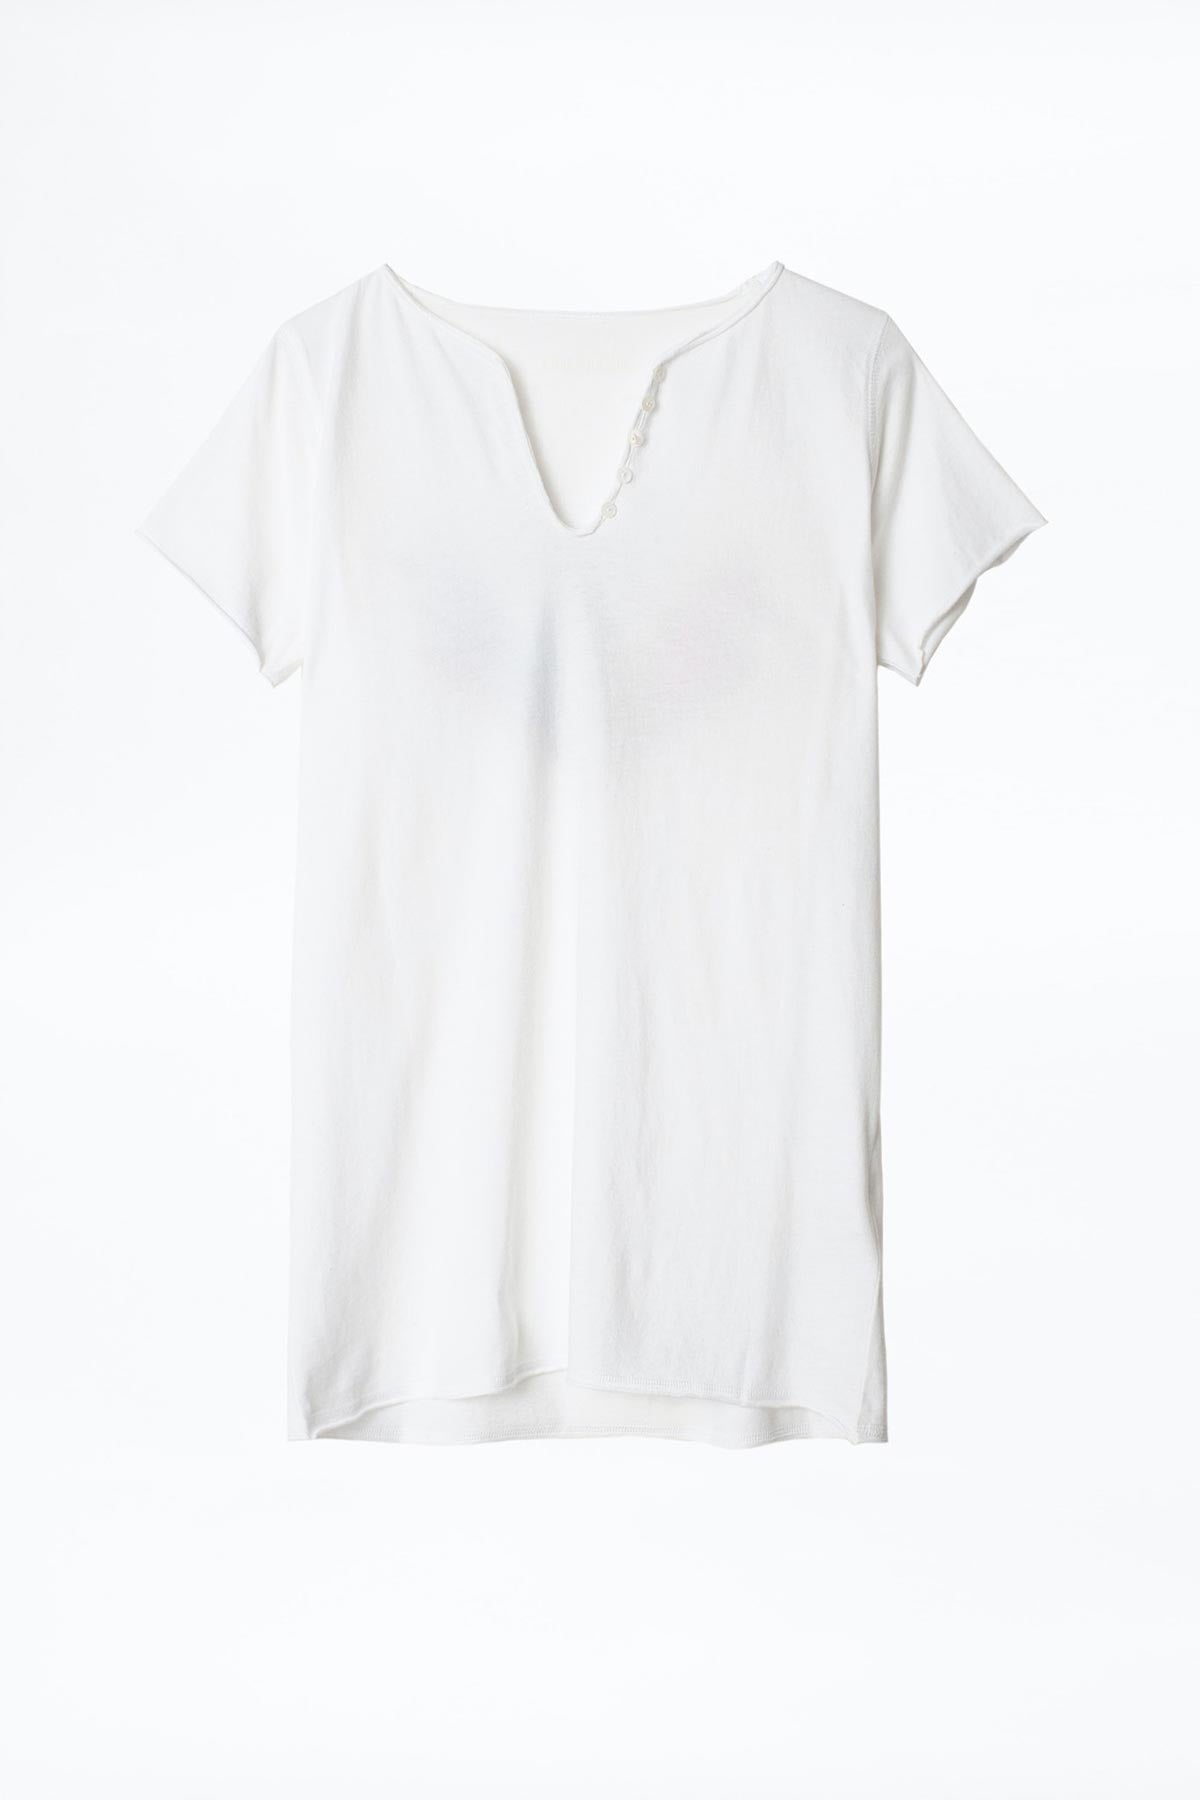 Zadig & Voltaire Love T-shirt-Libas Trendy Fashion Store